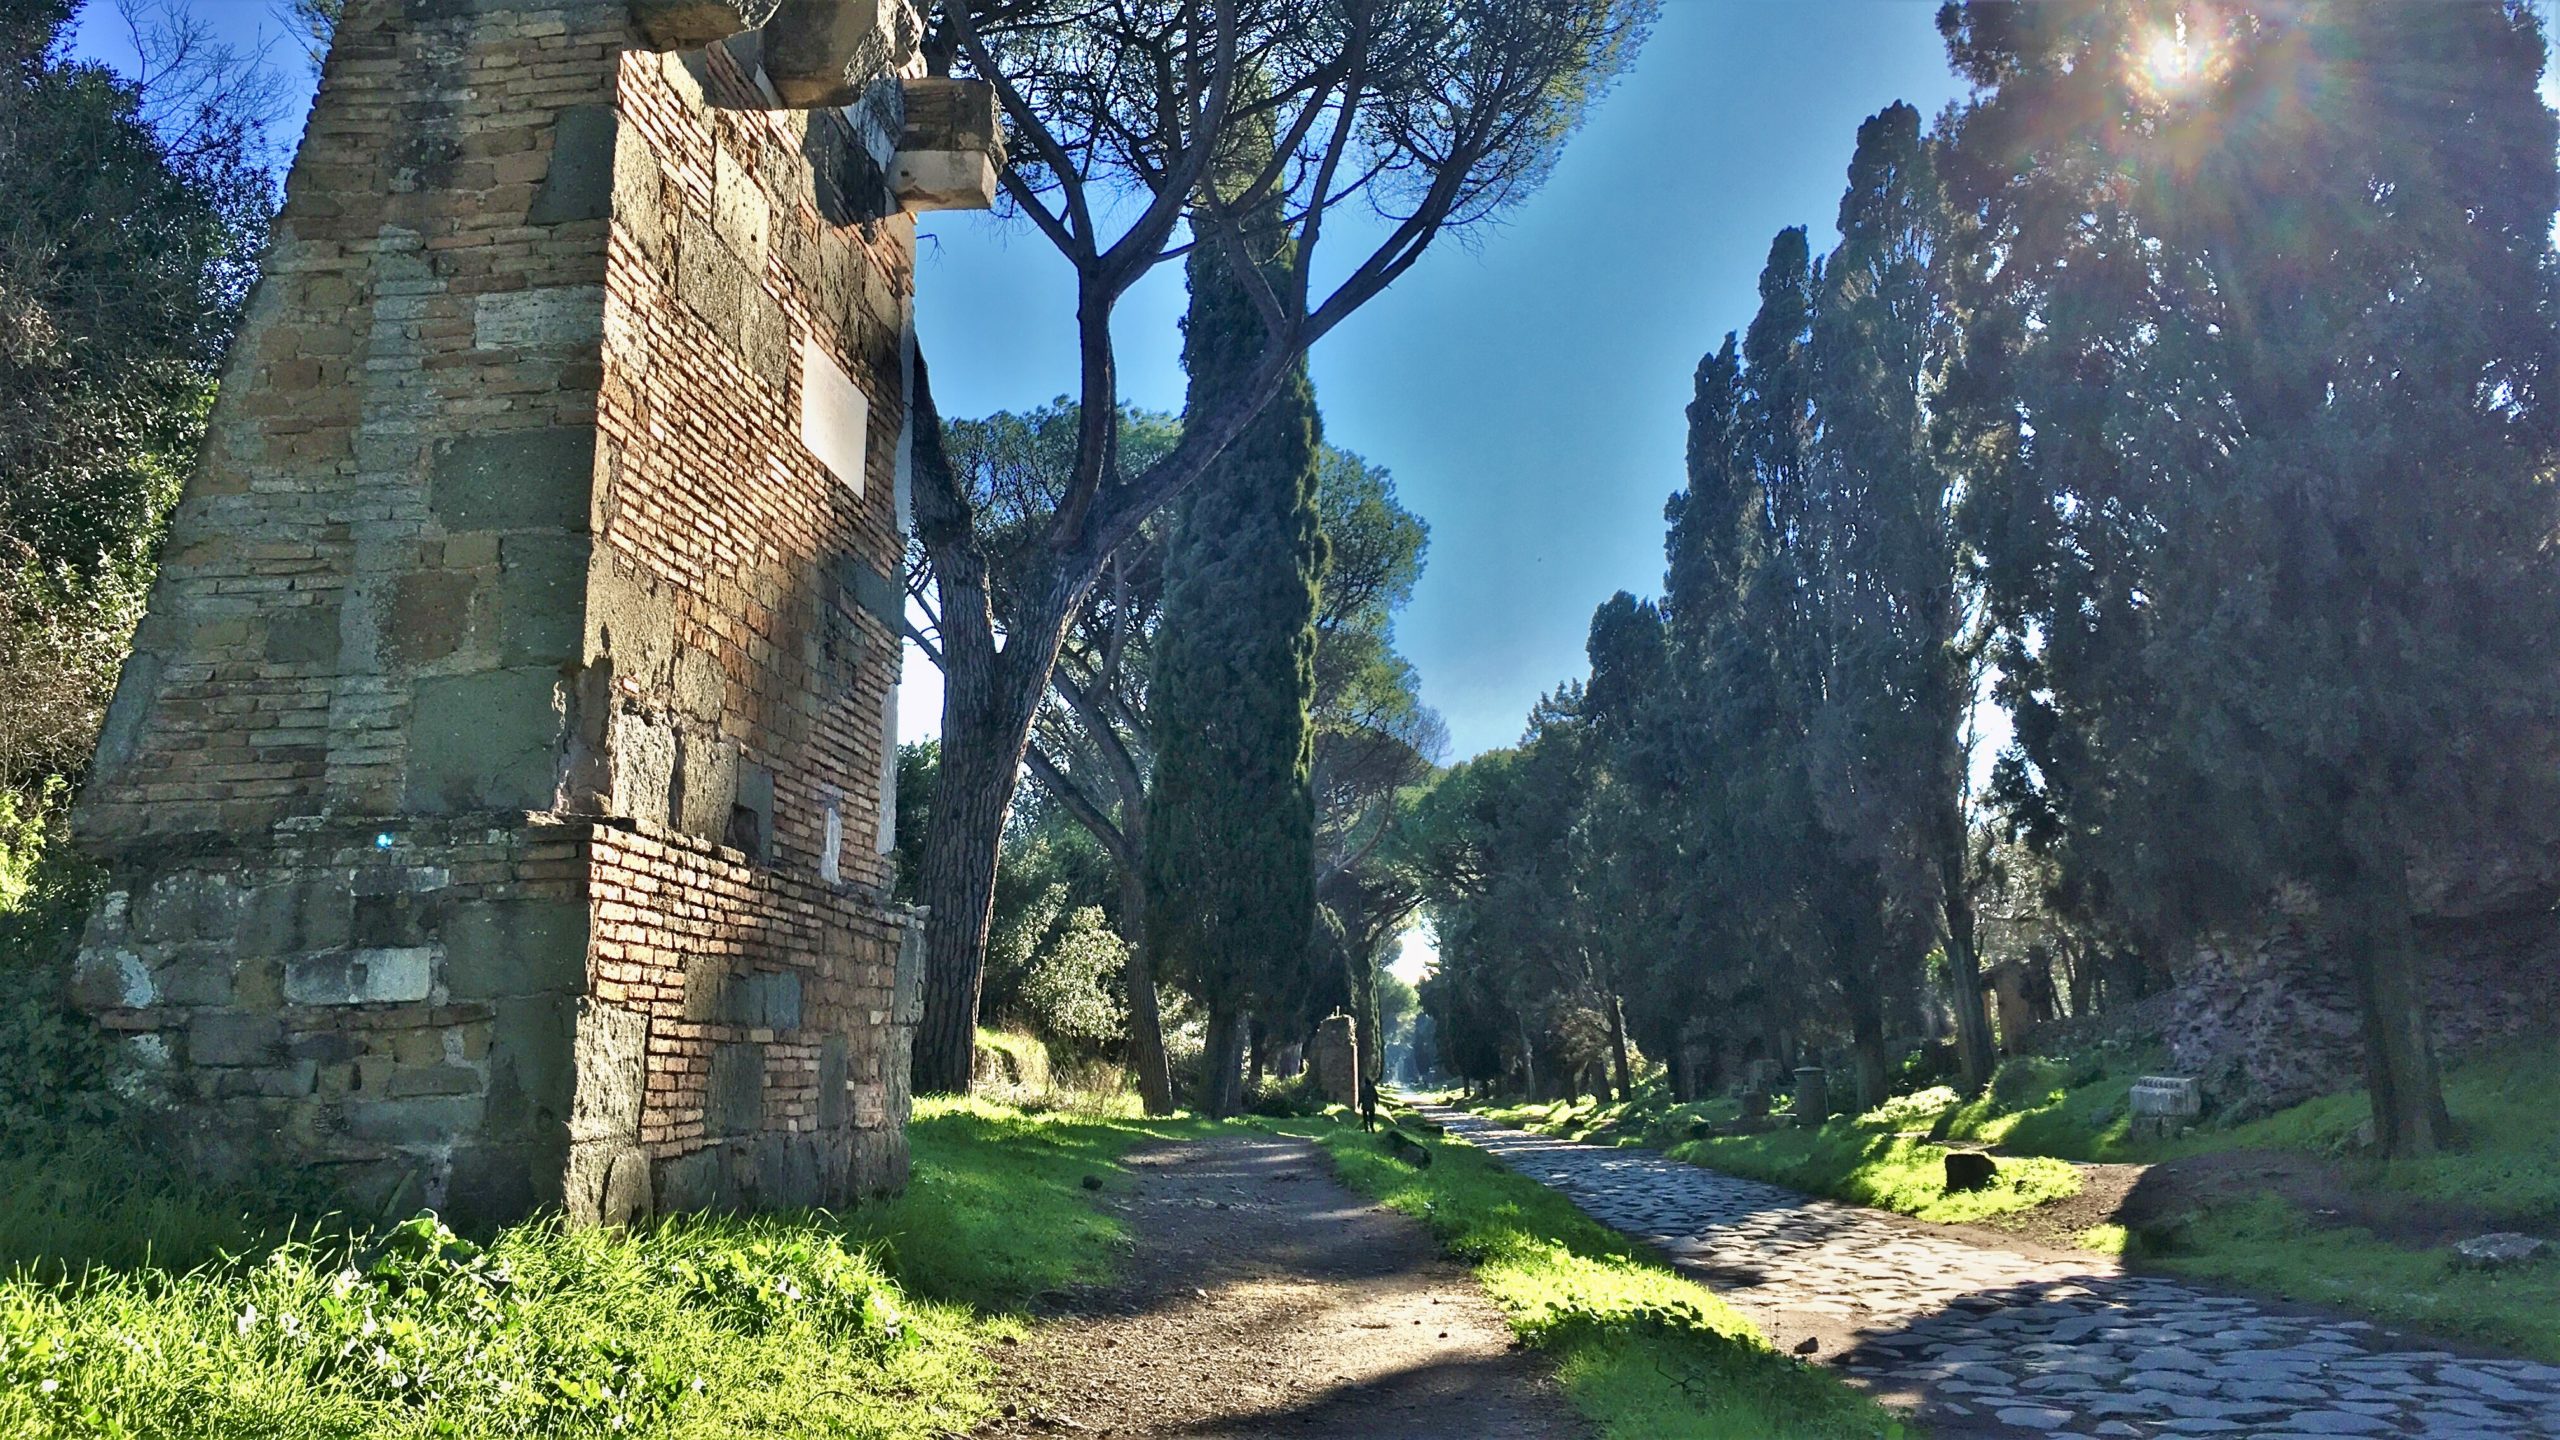 Appian Way Regional Park, An Adventurous Tale And Path To Discover Rome For Families